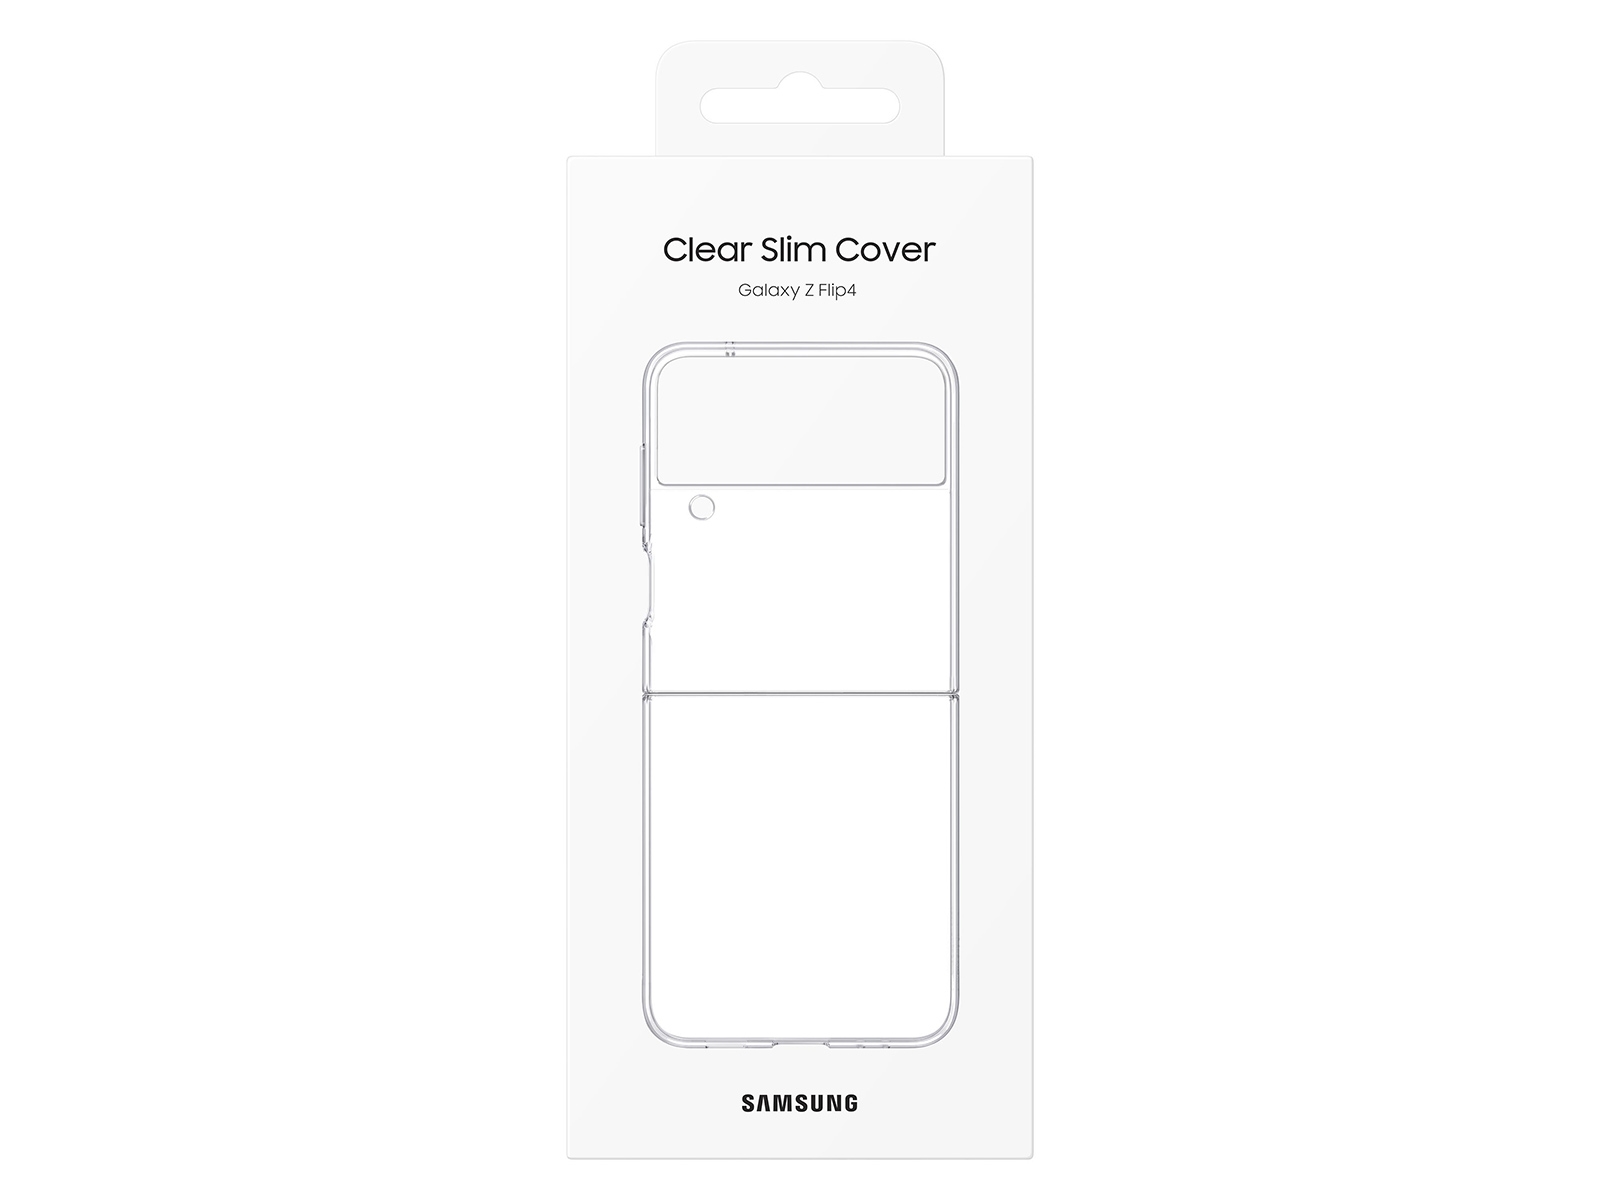 Thumbnail image of http://image-us.samsung.com/us/mobile-accessories/galaxy-z-flip4/b4-clear-slim-cover/gallery/03.jpg